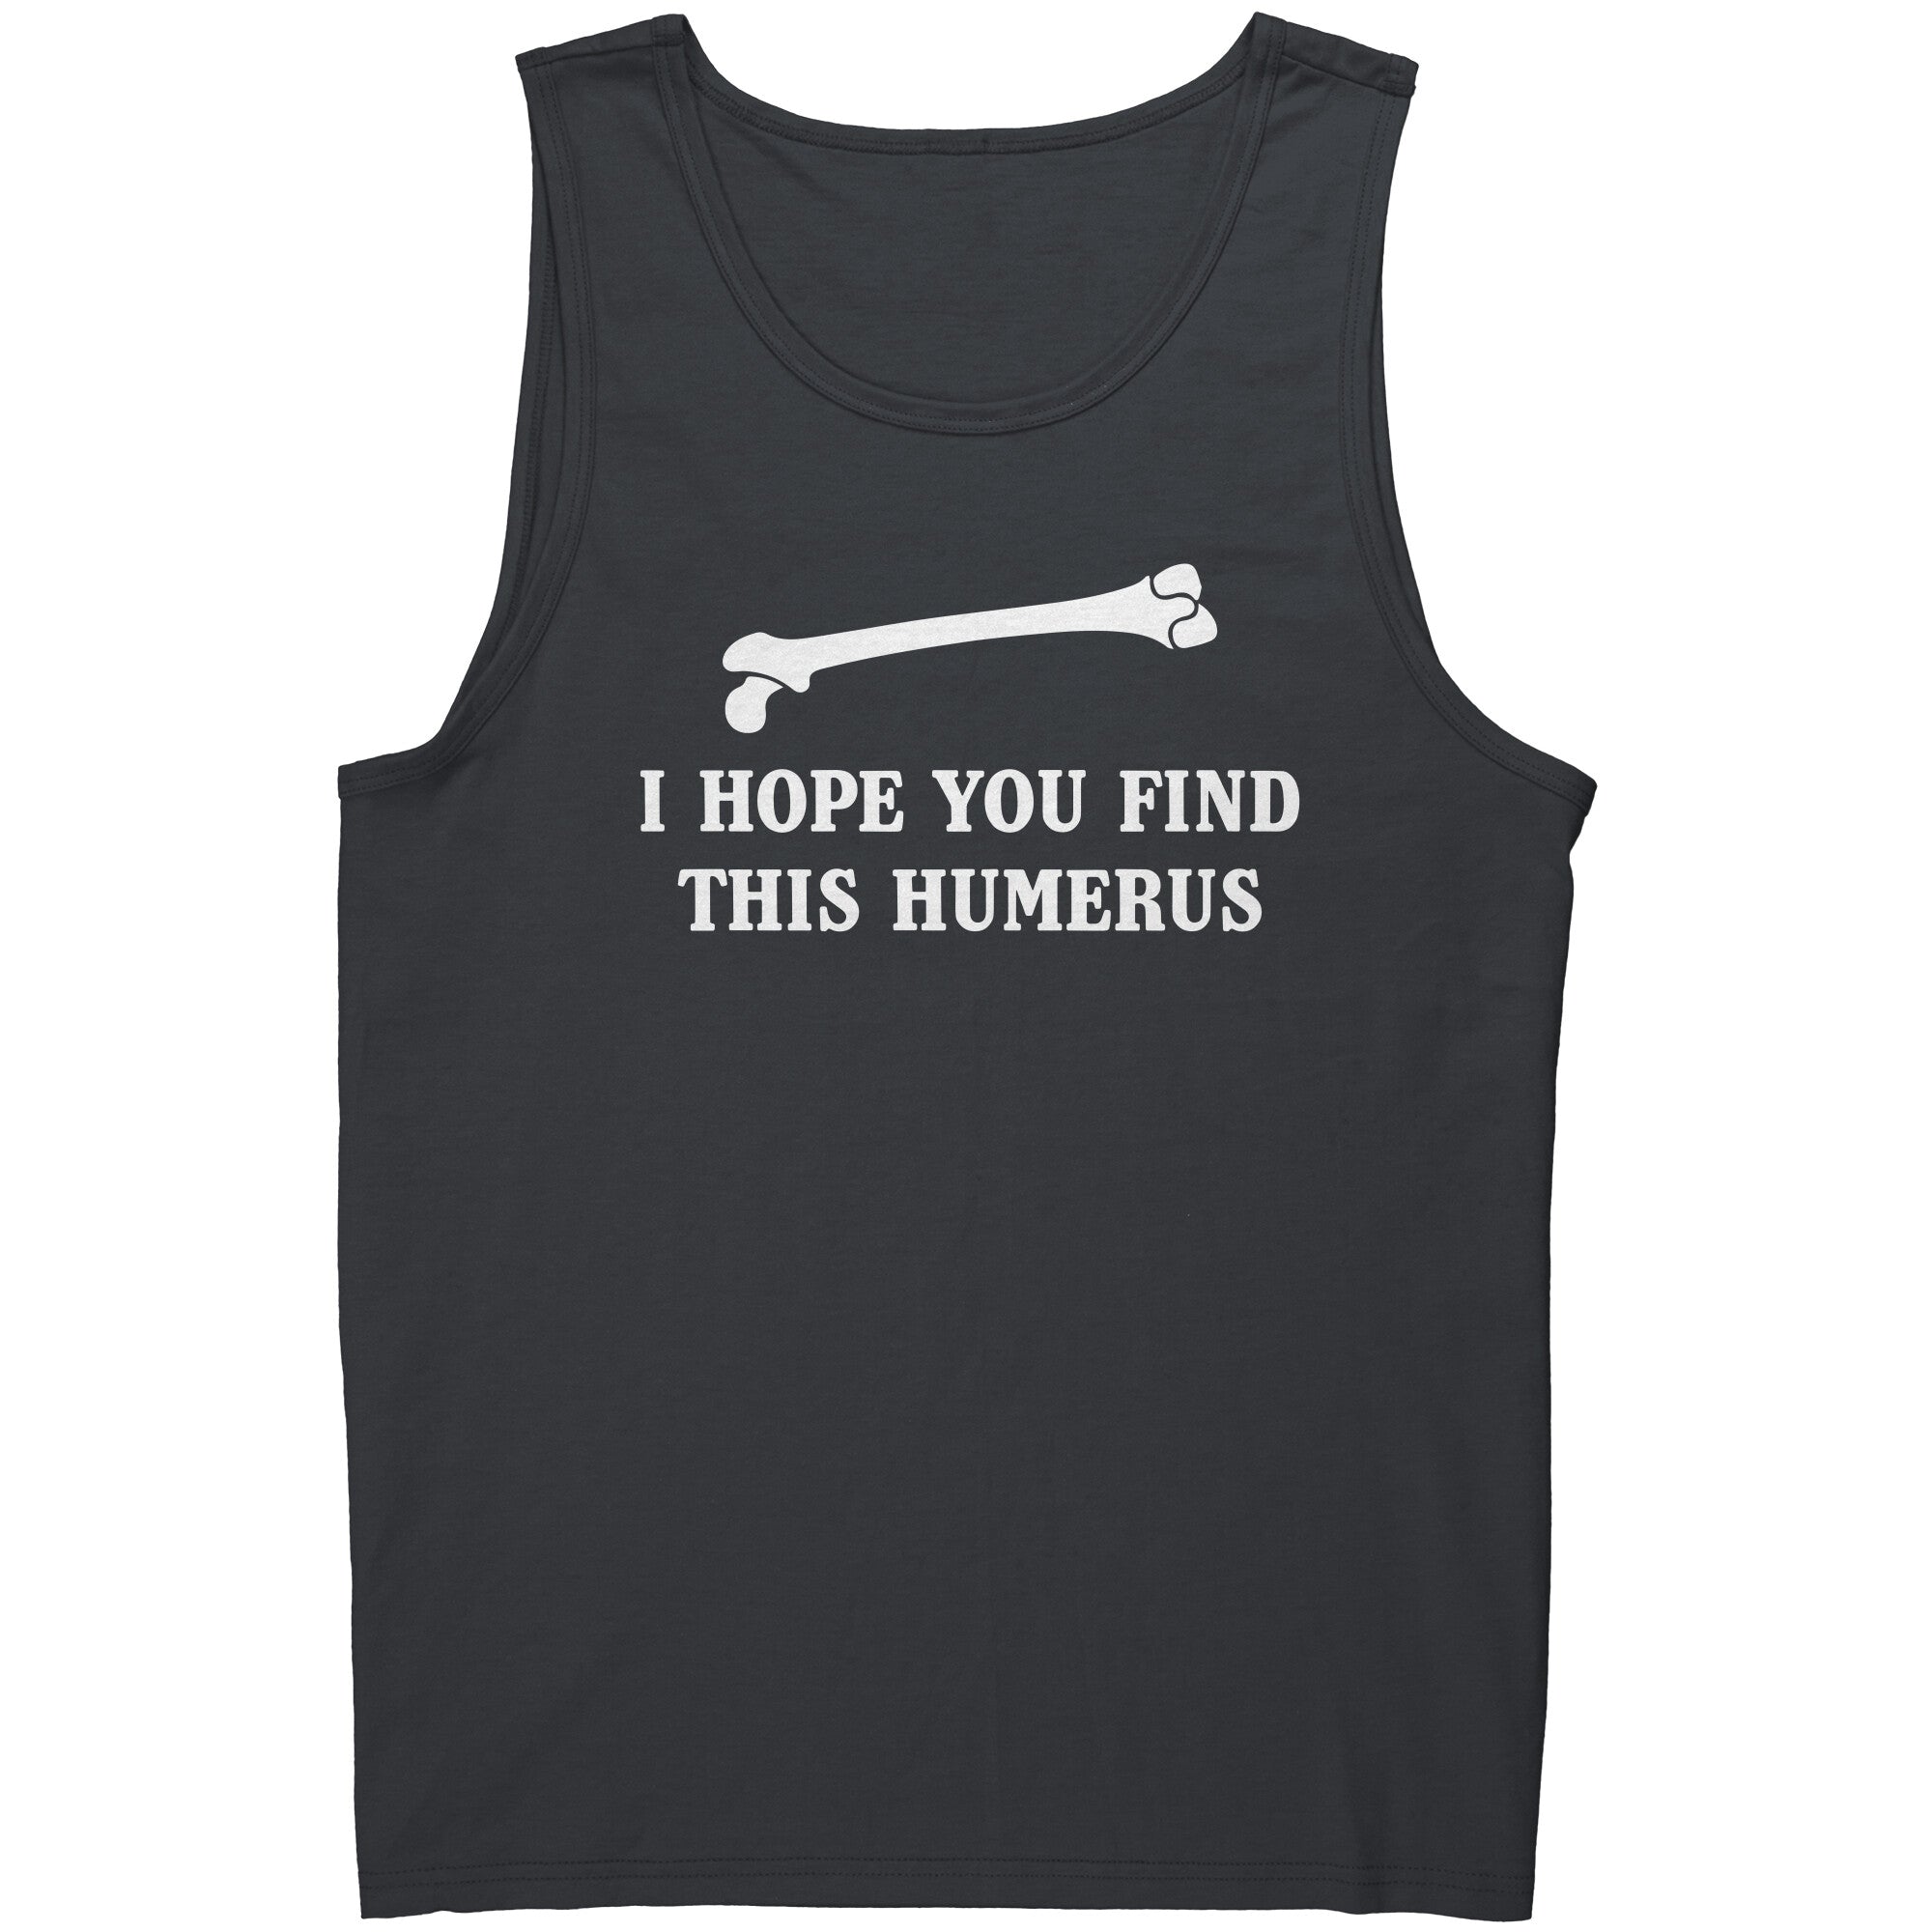 I Hope You Find This Humerus -Apparel | Drunk America 